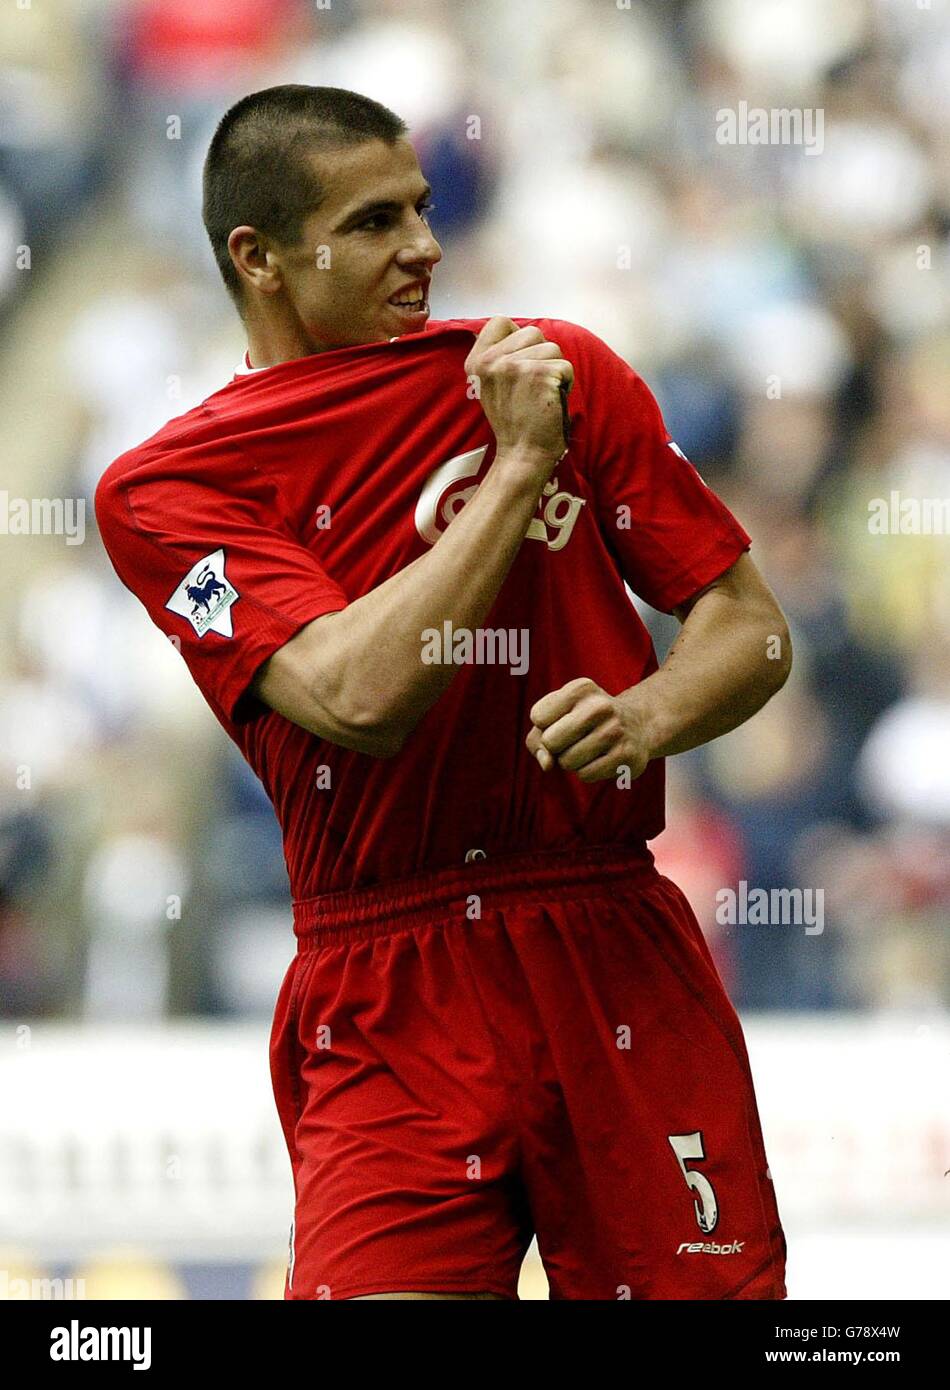 Liverpool's Milan Baros holds the club crest on his shirt as he celebrates scoring his second and his teams sixth goal against West Bromwich Albion, during their Barclaycard Premiership match at the Hawthorns, Birmingham. West Brom were beaten 6-0. Stock Photo